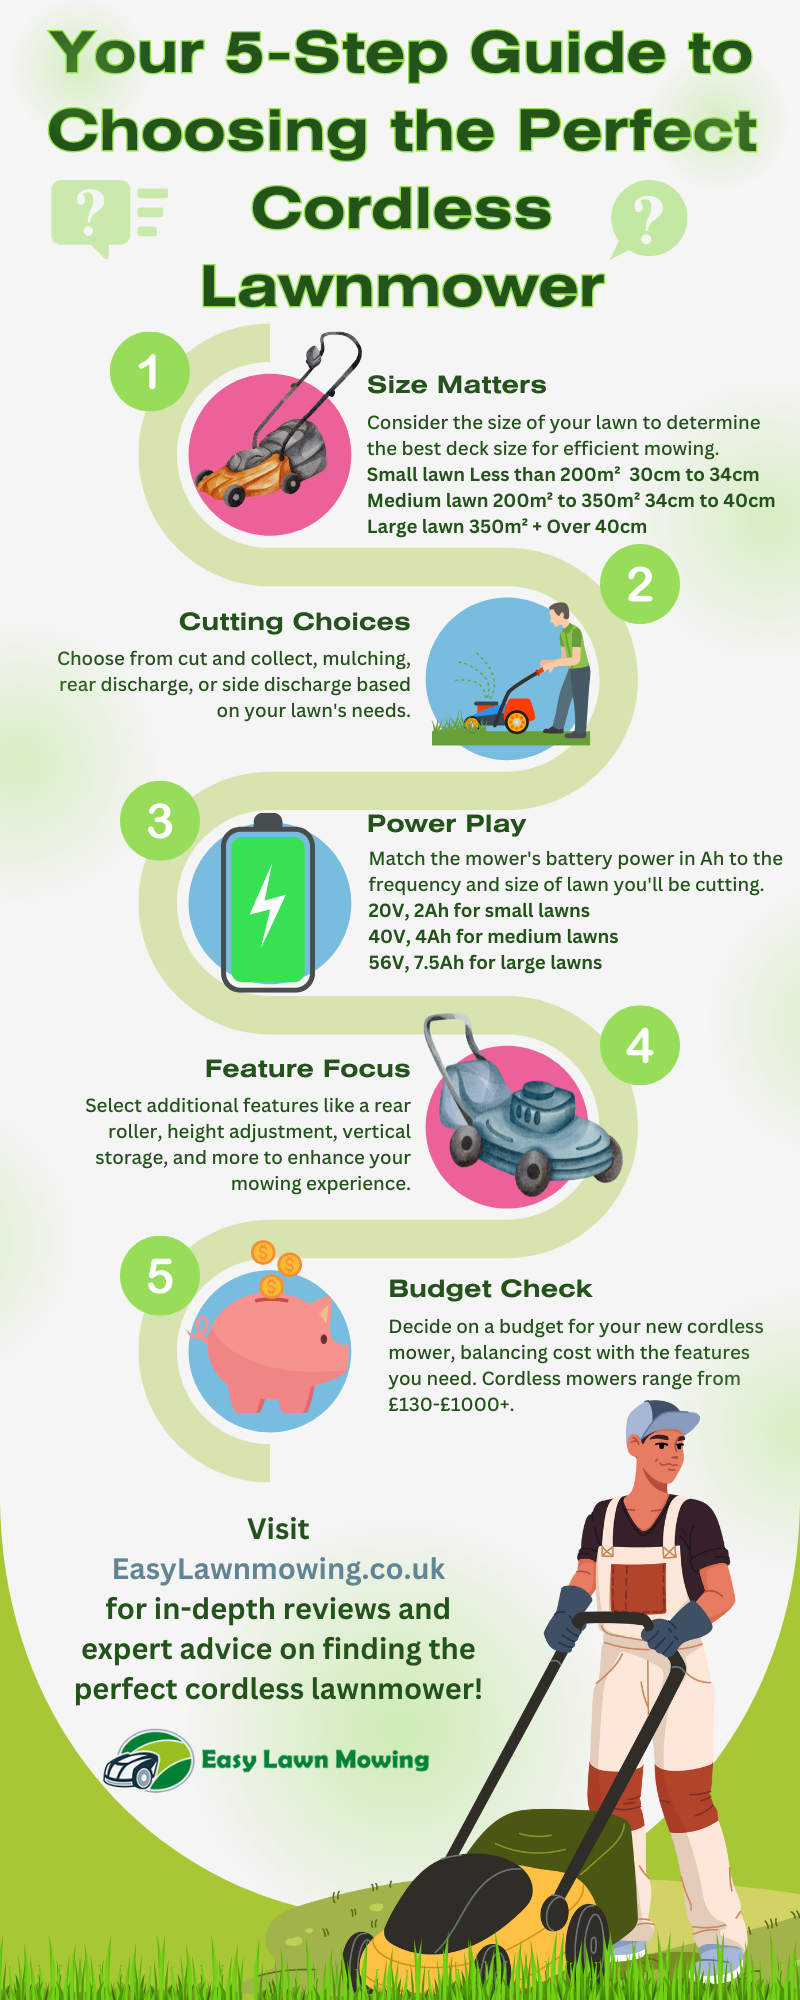 5-Step Guide to Choosing the Perfect Cordless Lawnmower